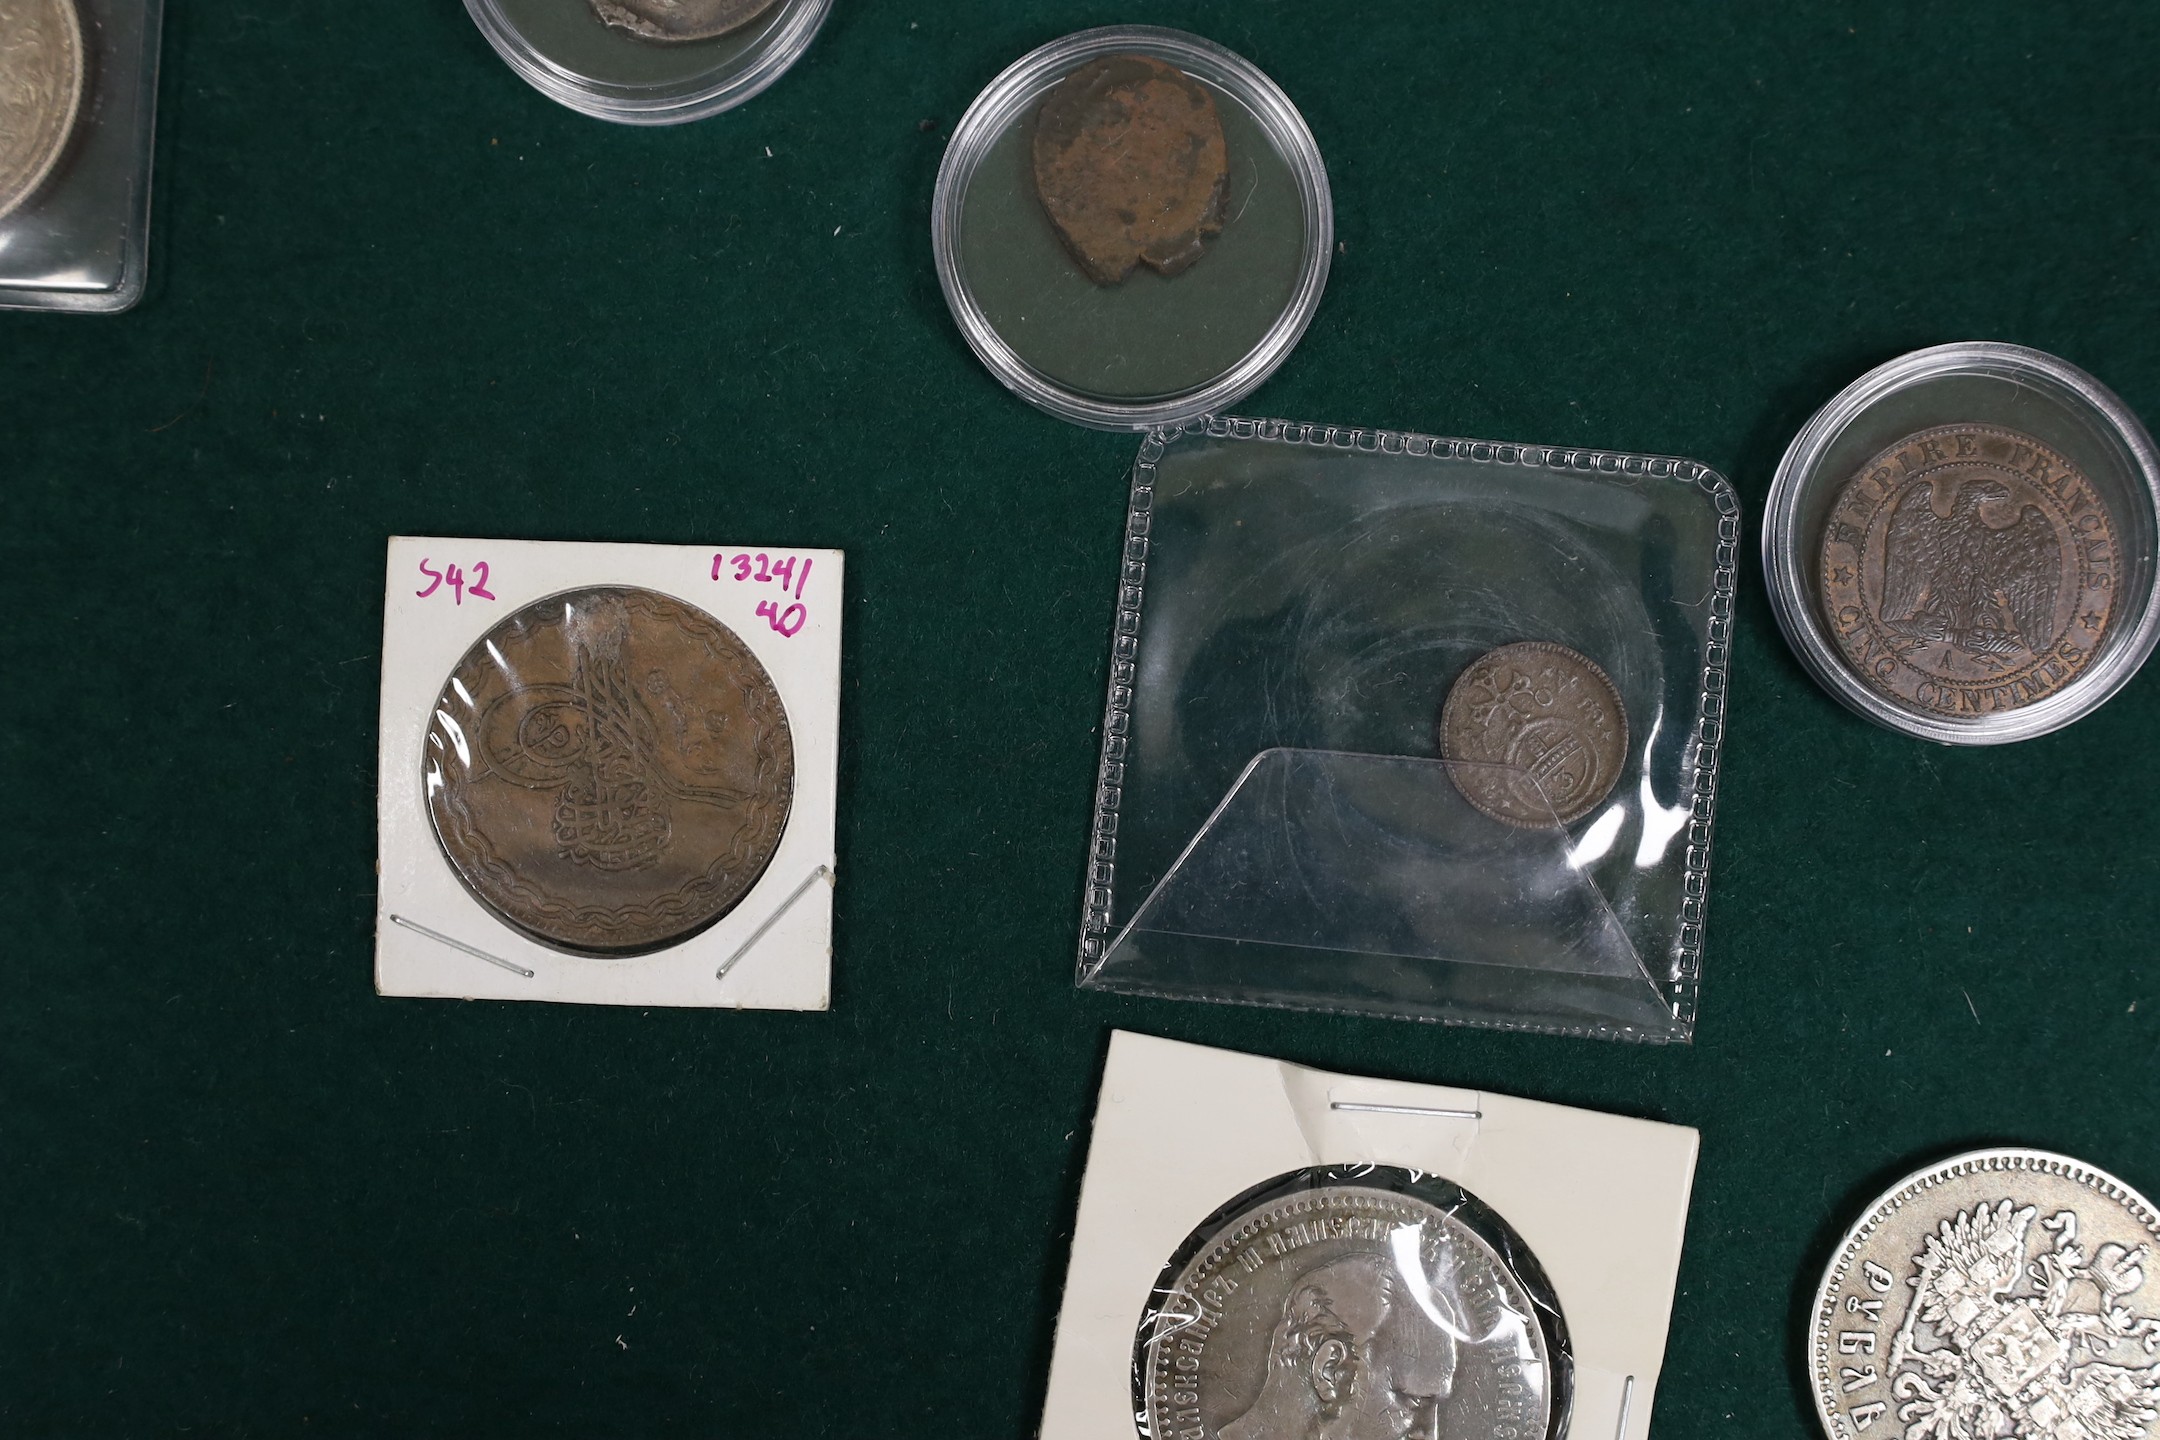 World coins - British-India, George V, 1 Rupee, (1911) Pig elephant, UNC, two U.S. one cent planchet die errors, U.S. quarter dollar 1932, Russia 1 rouble 1894, near VF, a Tectosages AR cross coin, European medieval coin